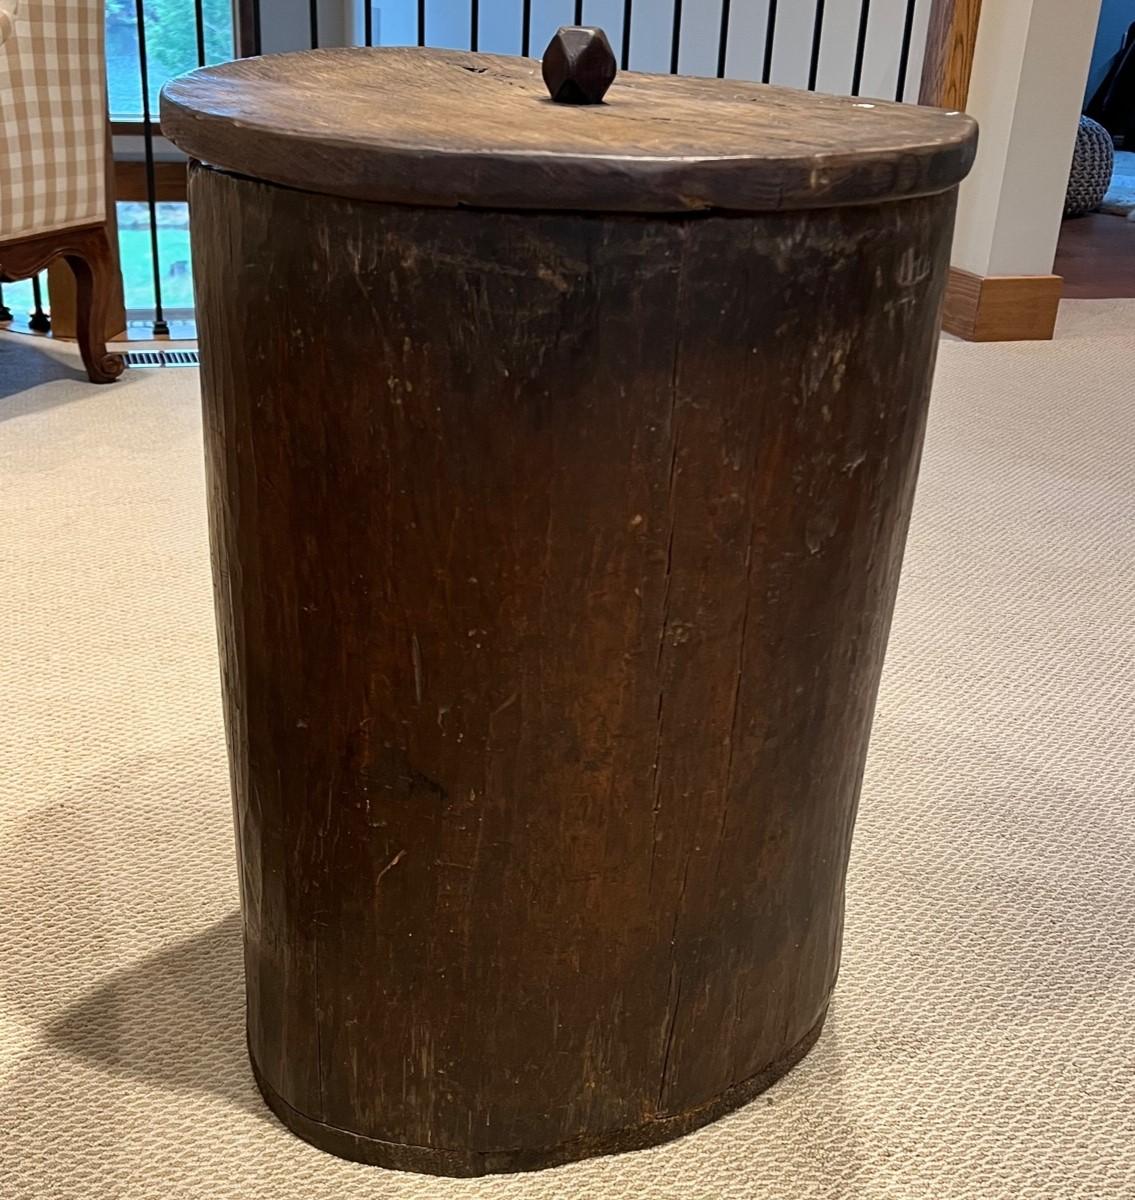 A 19th Century hand hewn tree trunk storage barrel with lid. This large lidded barrel has oodles of character. The organic shape of the barrel retains the shape of the tree from which it was hewn, including the crotch or plume that can be seen on